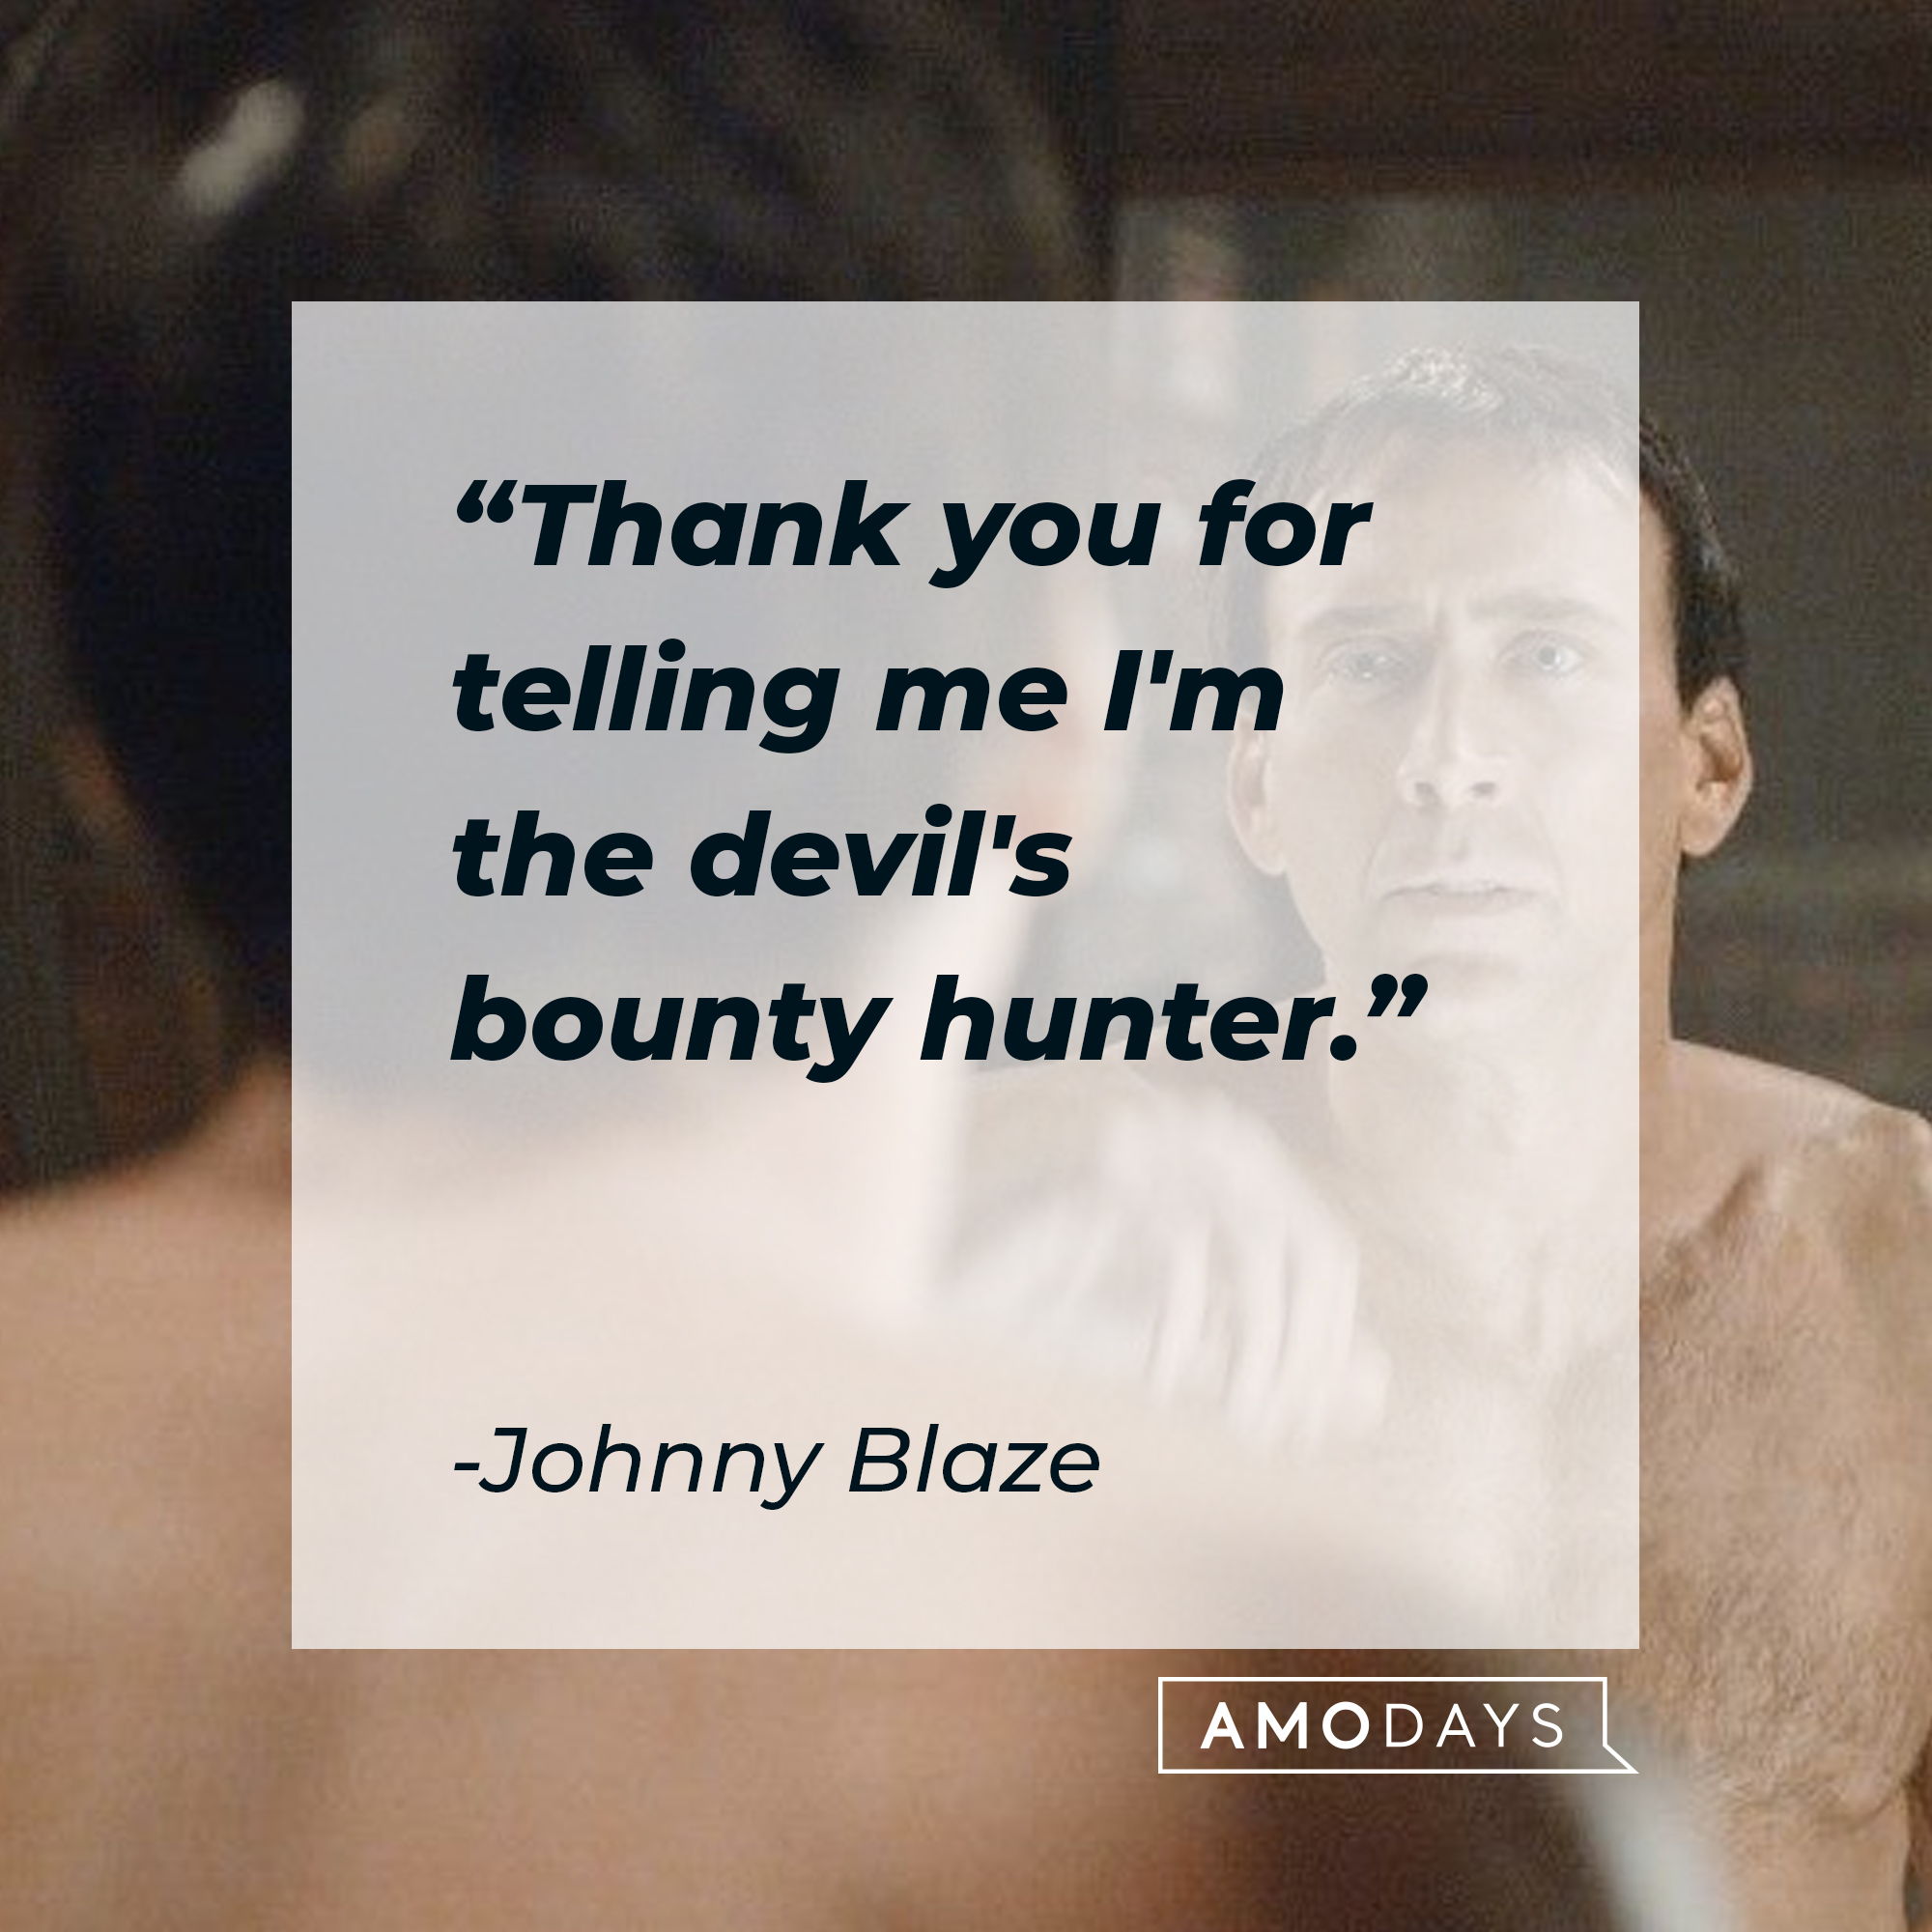 Johnny Blaze's quote: "Thank you for telling me I'm the devil's bounty hunter." | Source: facebook.com/ghostridermovie